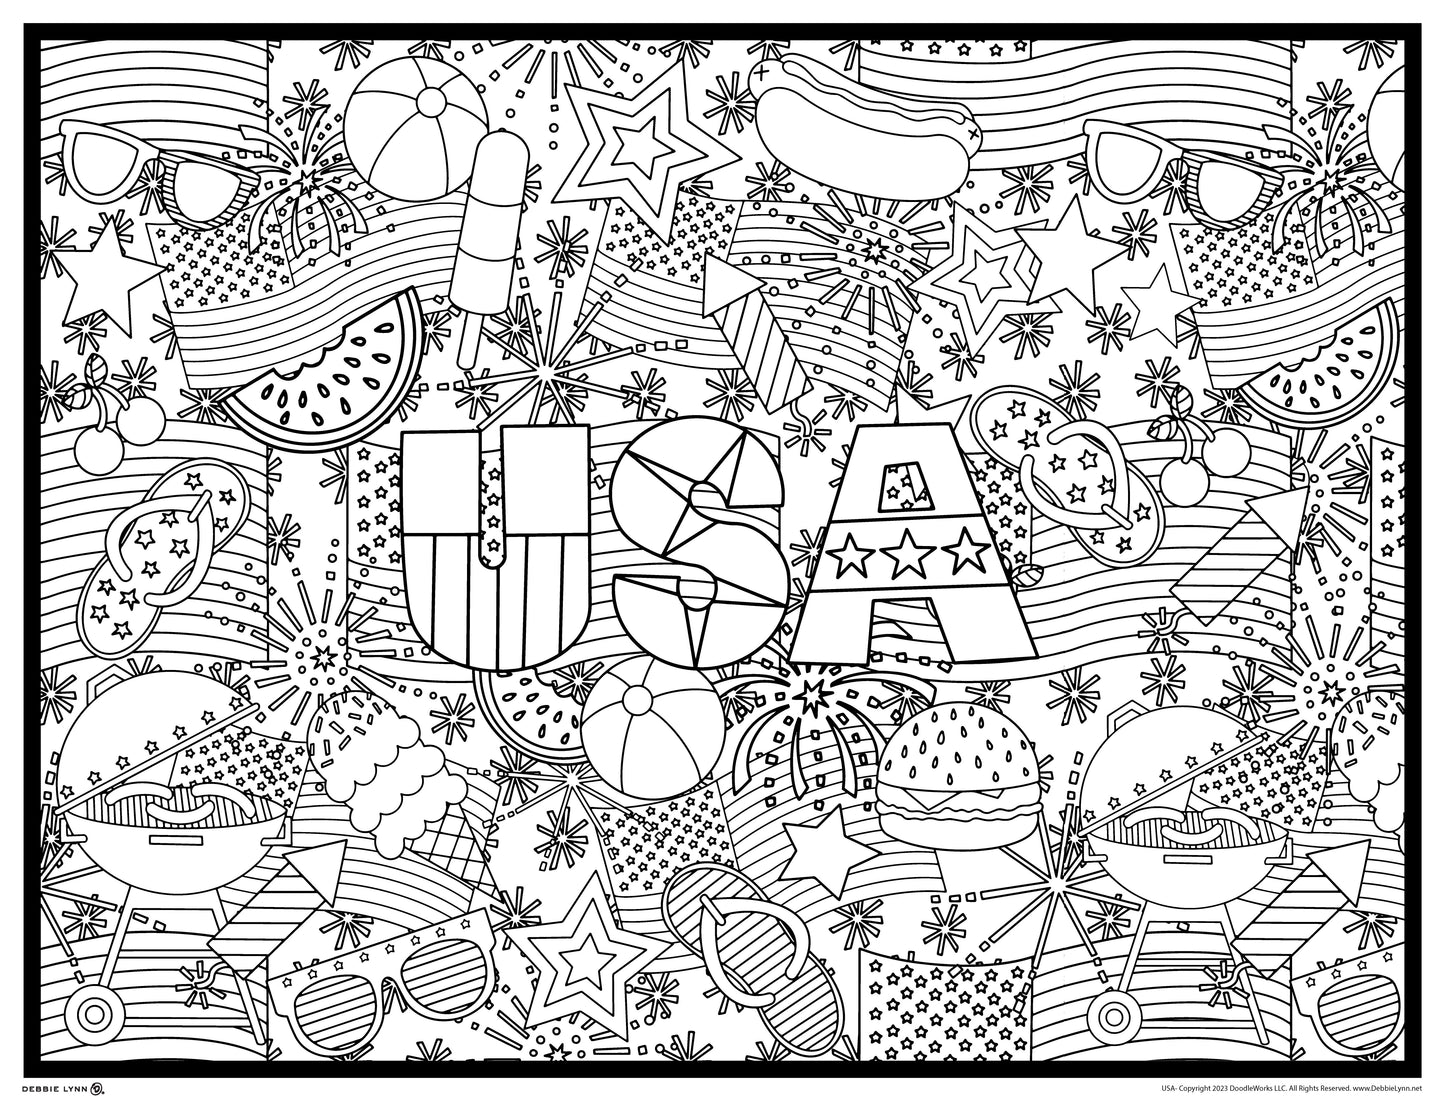 USA Icons Personalized Giant Coloring Poster 46"x60"